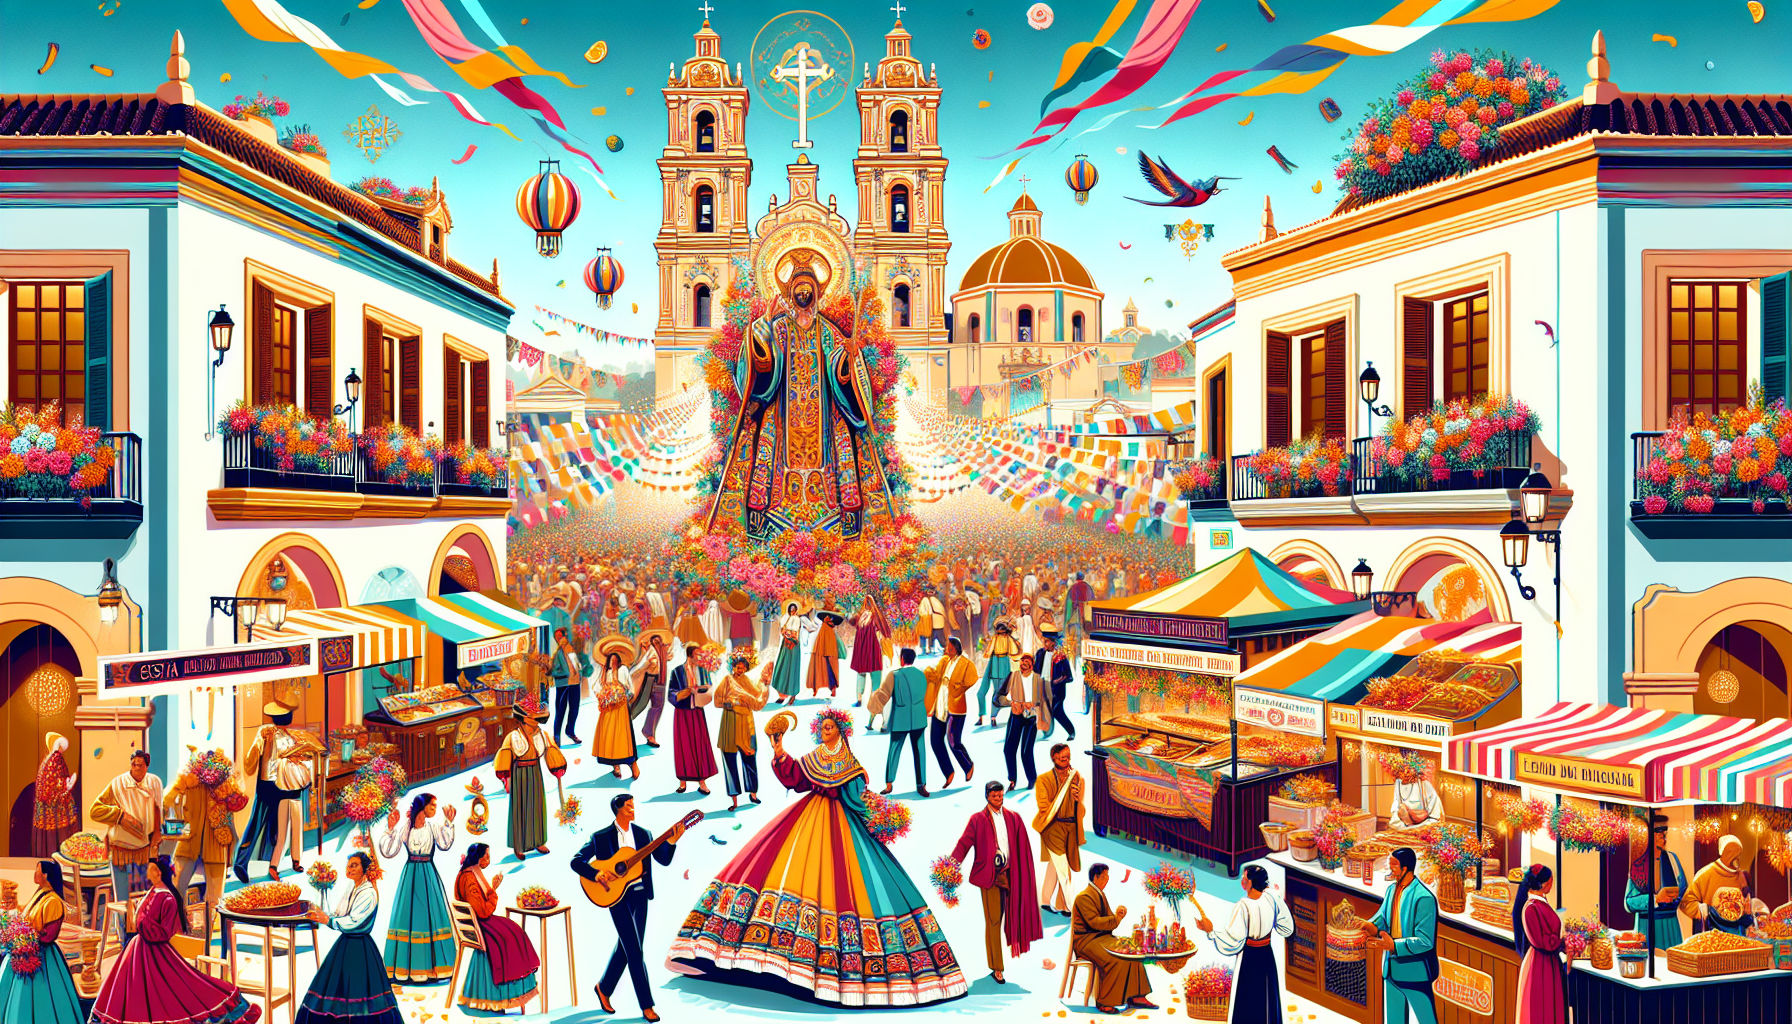 Create a vibrant and festive scene that celebrates the Fiesta de San José. Incorporate traditional Spanish architecture, lively crowds in colorful traditional attire, and a detailed image of San José